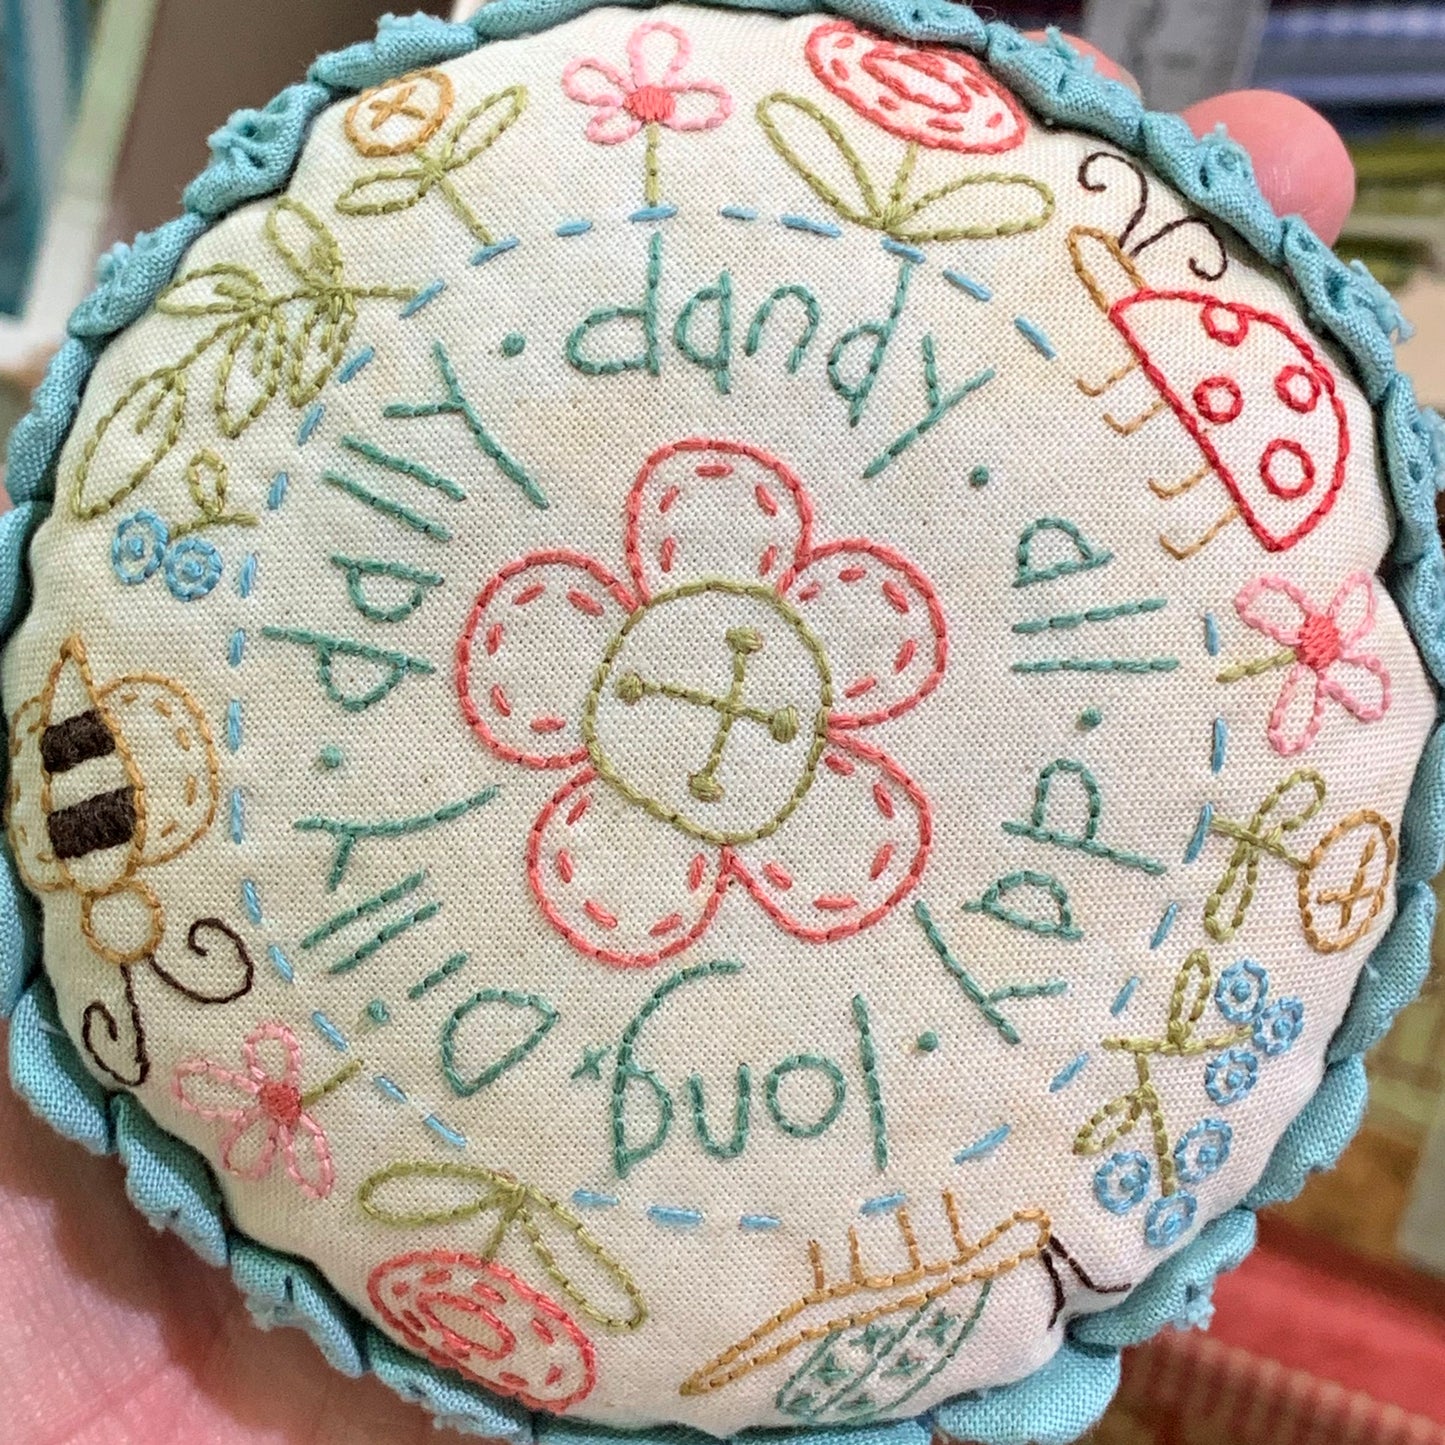 Dilly Dally pincushion - embroidery project Birdhouse pattern